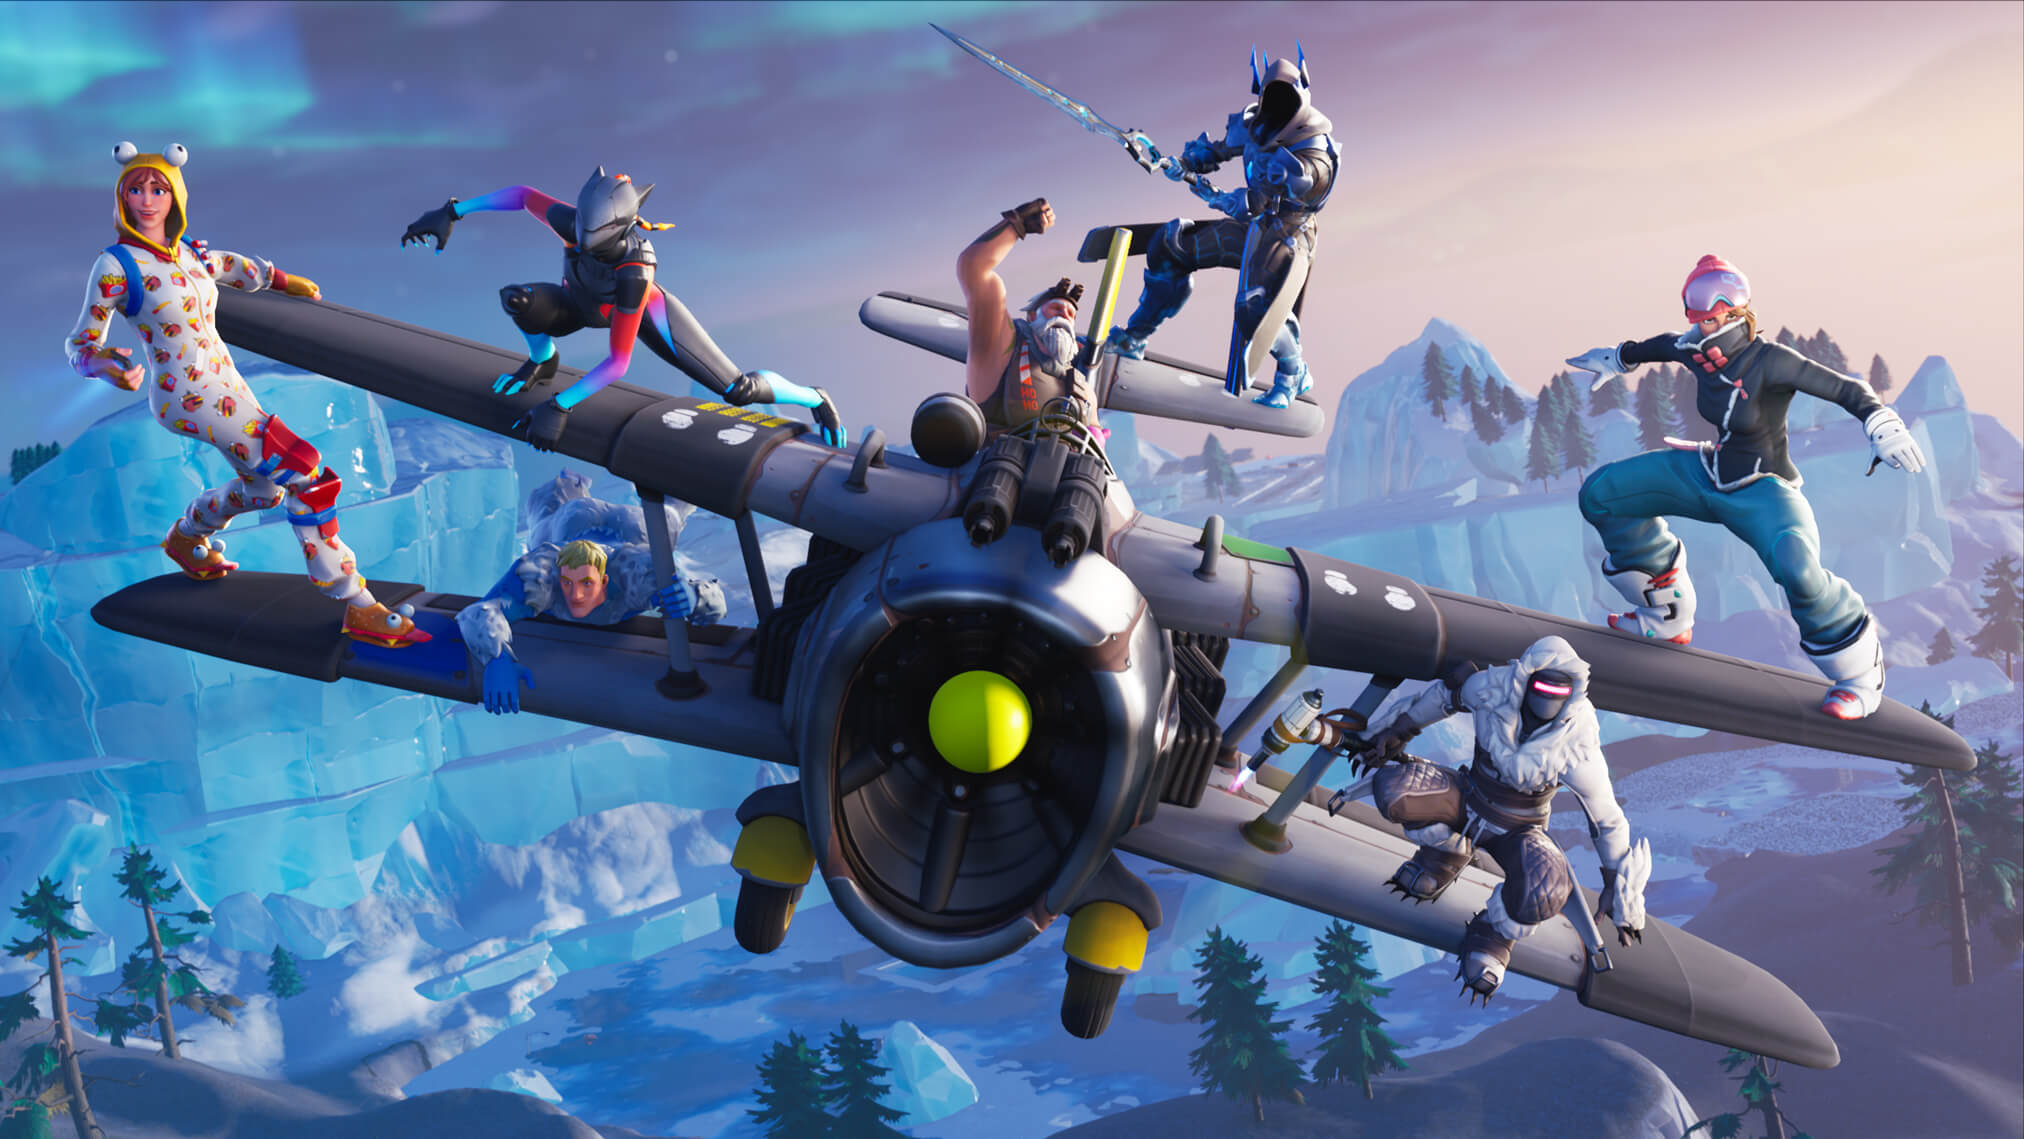 The best games like Fortnite on Switch and mobile